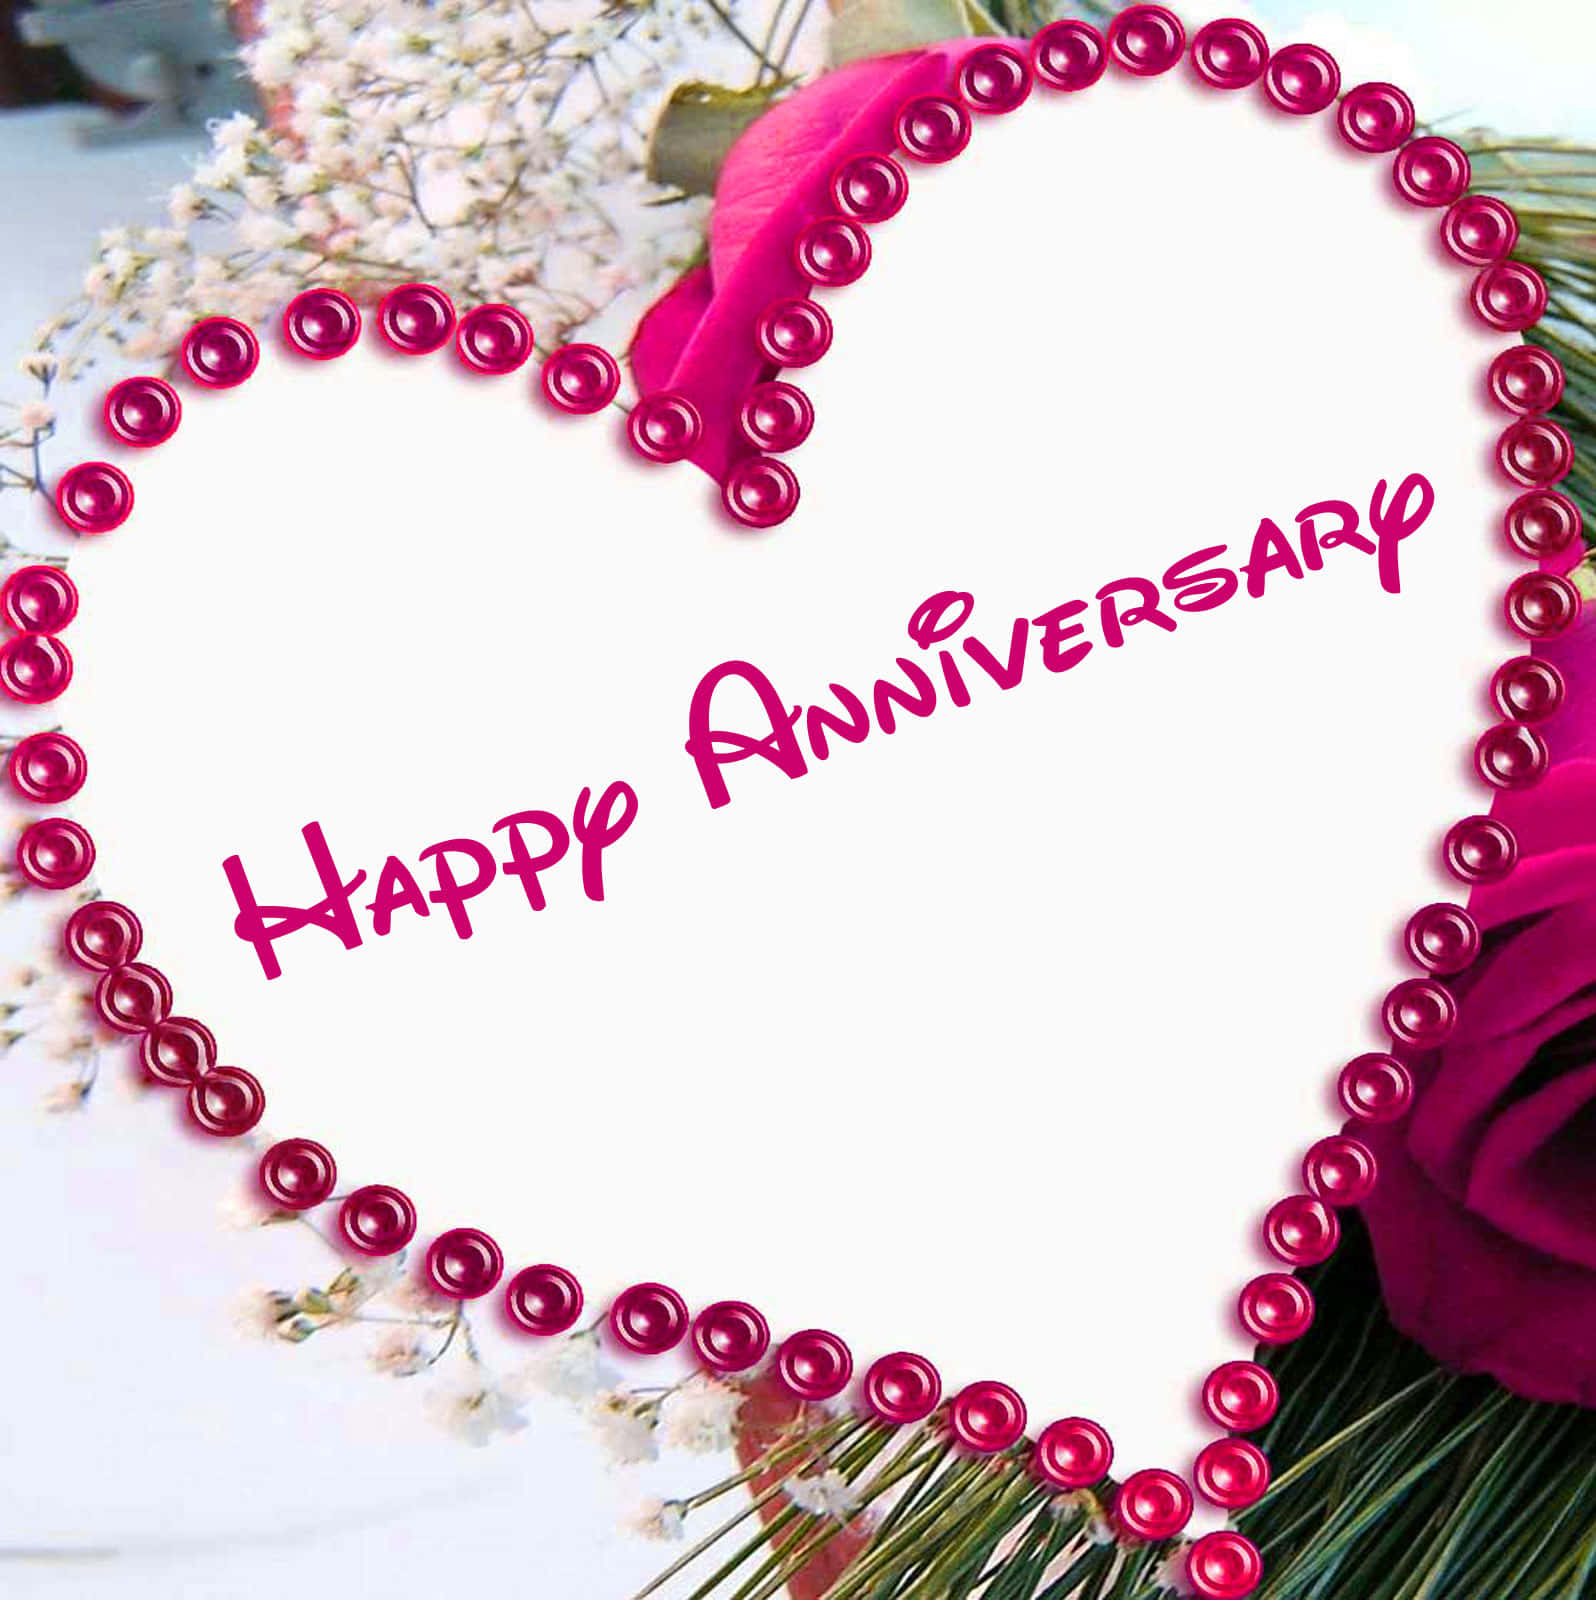 Anniversary Cake Designed With Pink Pearls Wallpaper